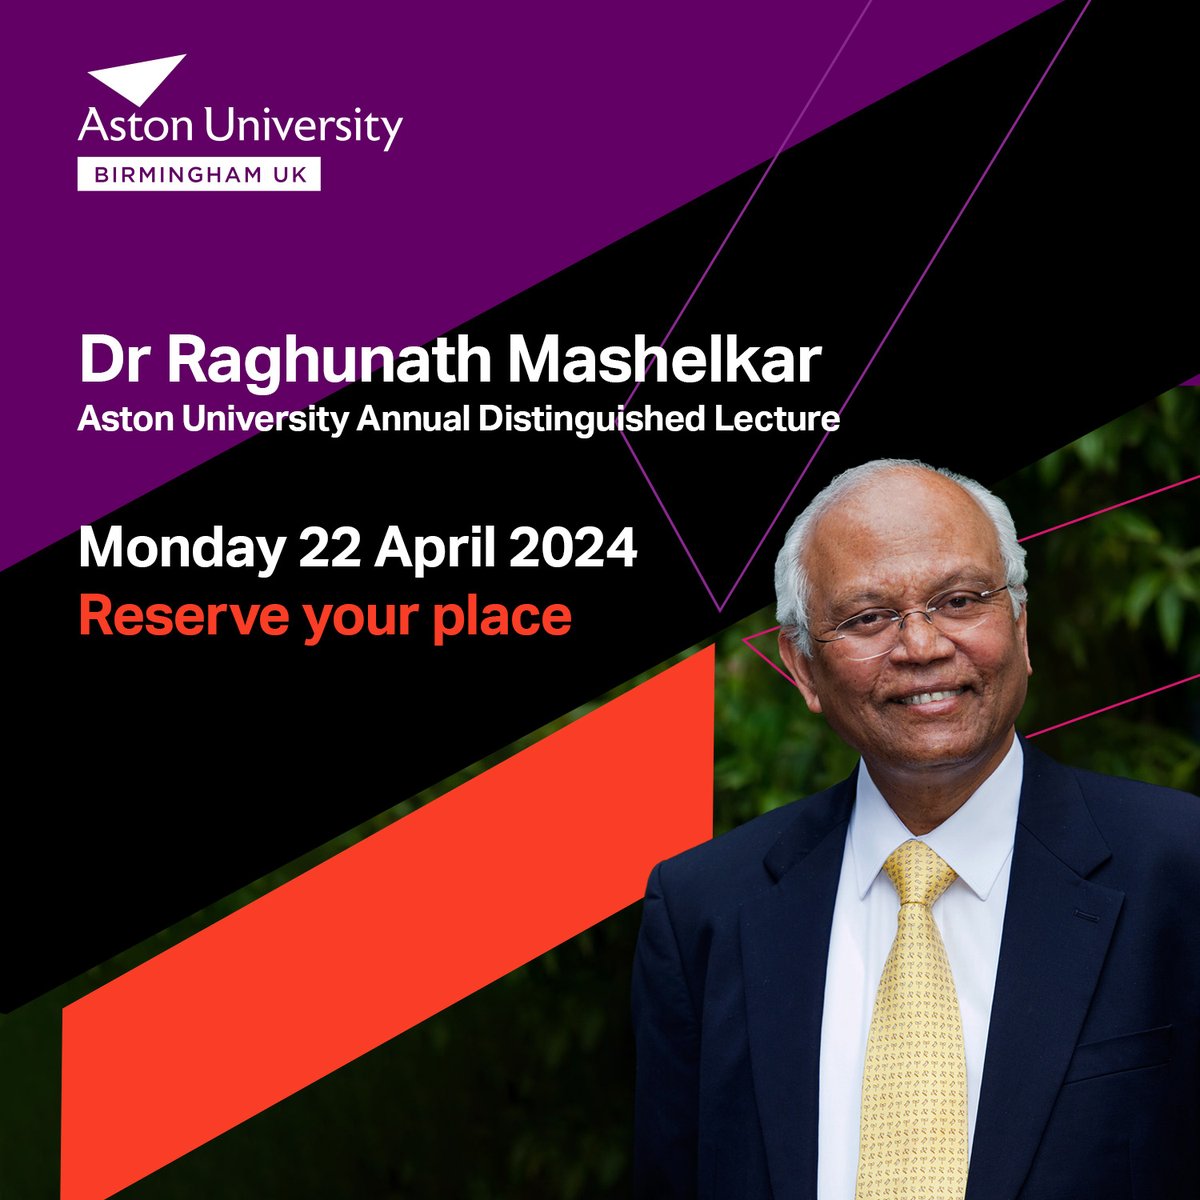 🔬We are delighted to be joined by Dr Raghunath Mashelkar an internationally renowned science leader. He has served on some of the most important global scientific bodies, including on the Queen Elizabeth Prizes for Engineering awards committee in UK 👉tinyurl.com/465jdds8